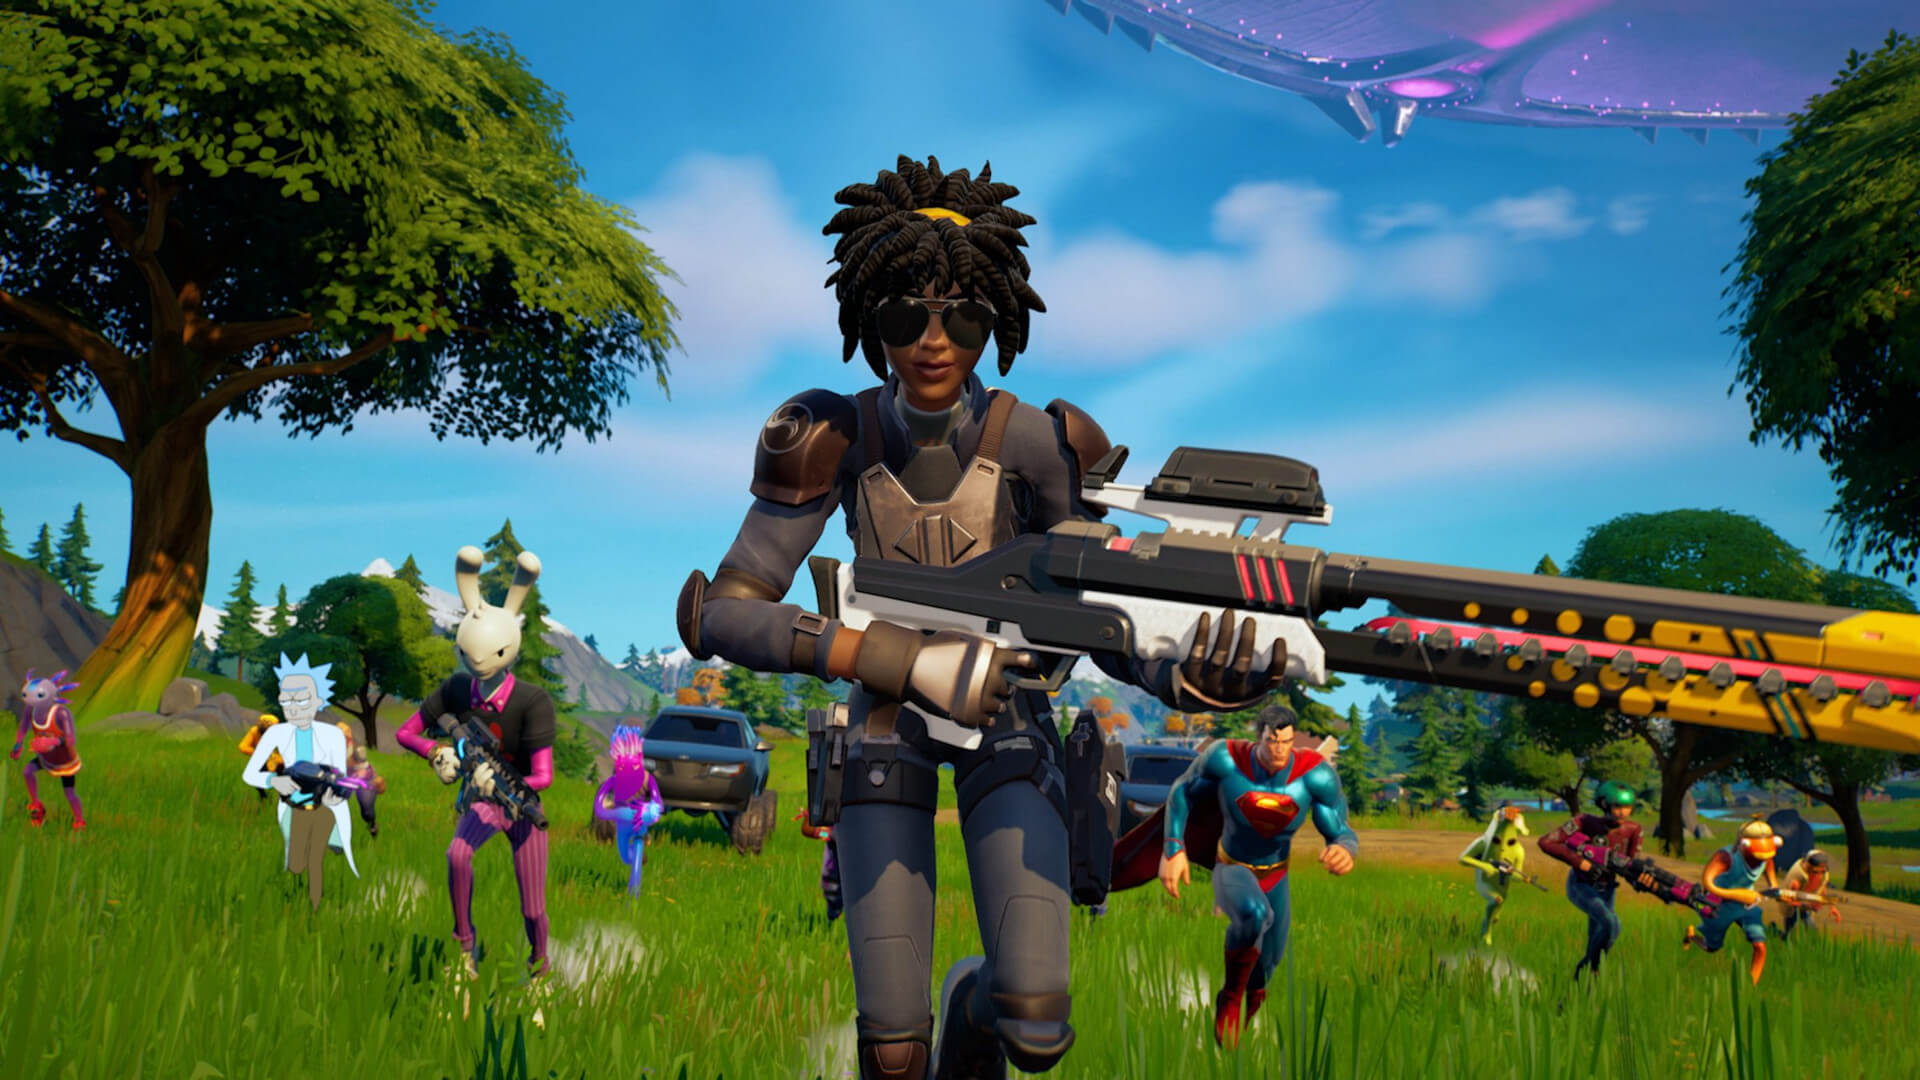 Several of the characters in Epic's Fortnite battle royale